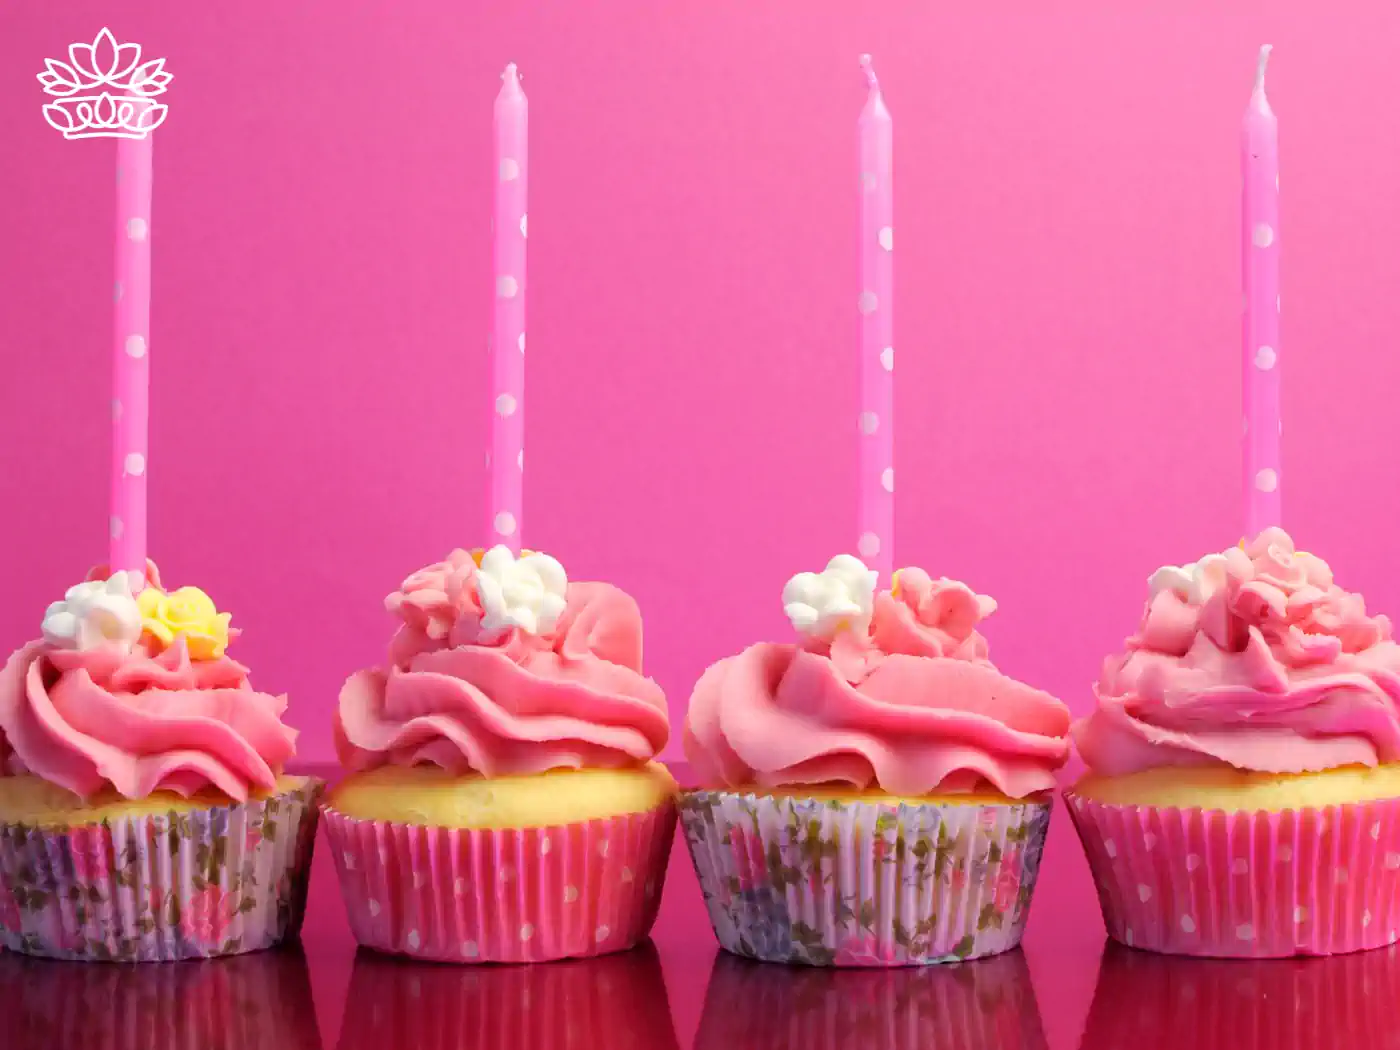 Four delicious cupcakes with pink frosting and candles, perfect for celebrations. Fabulous Flowers and Gifts